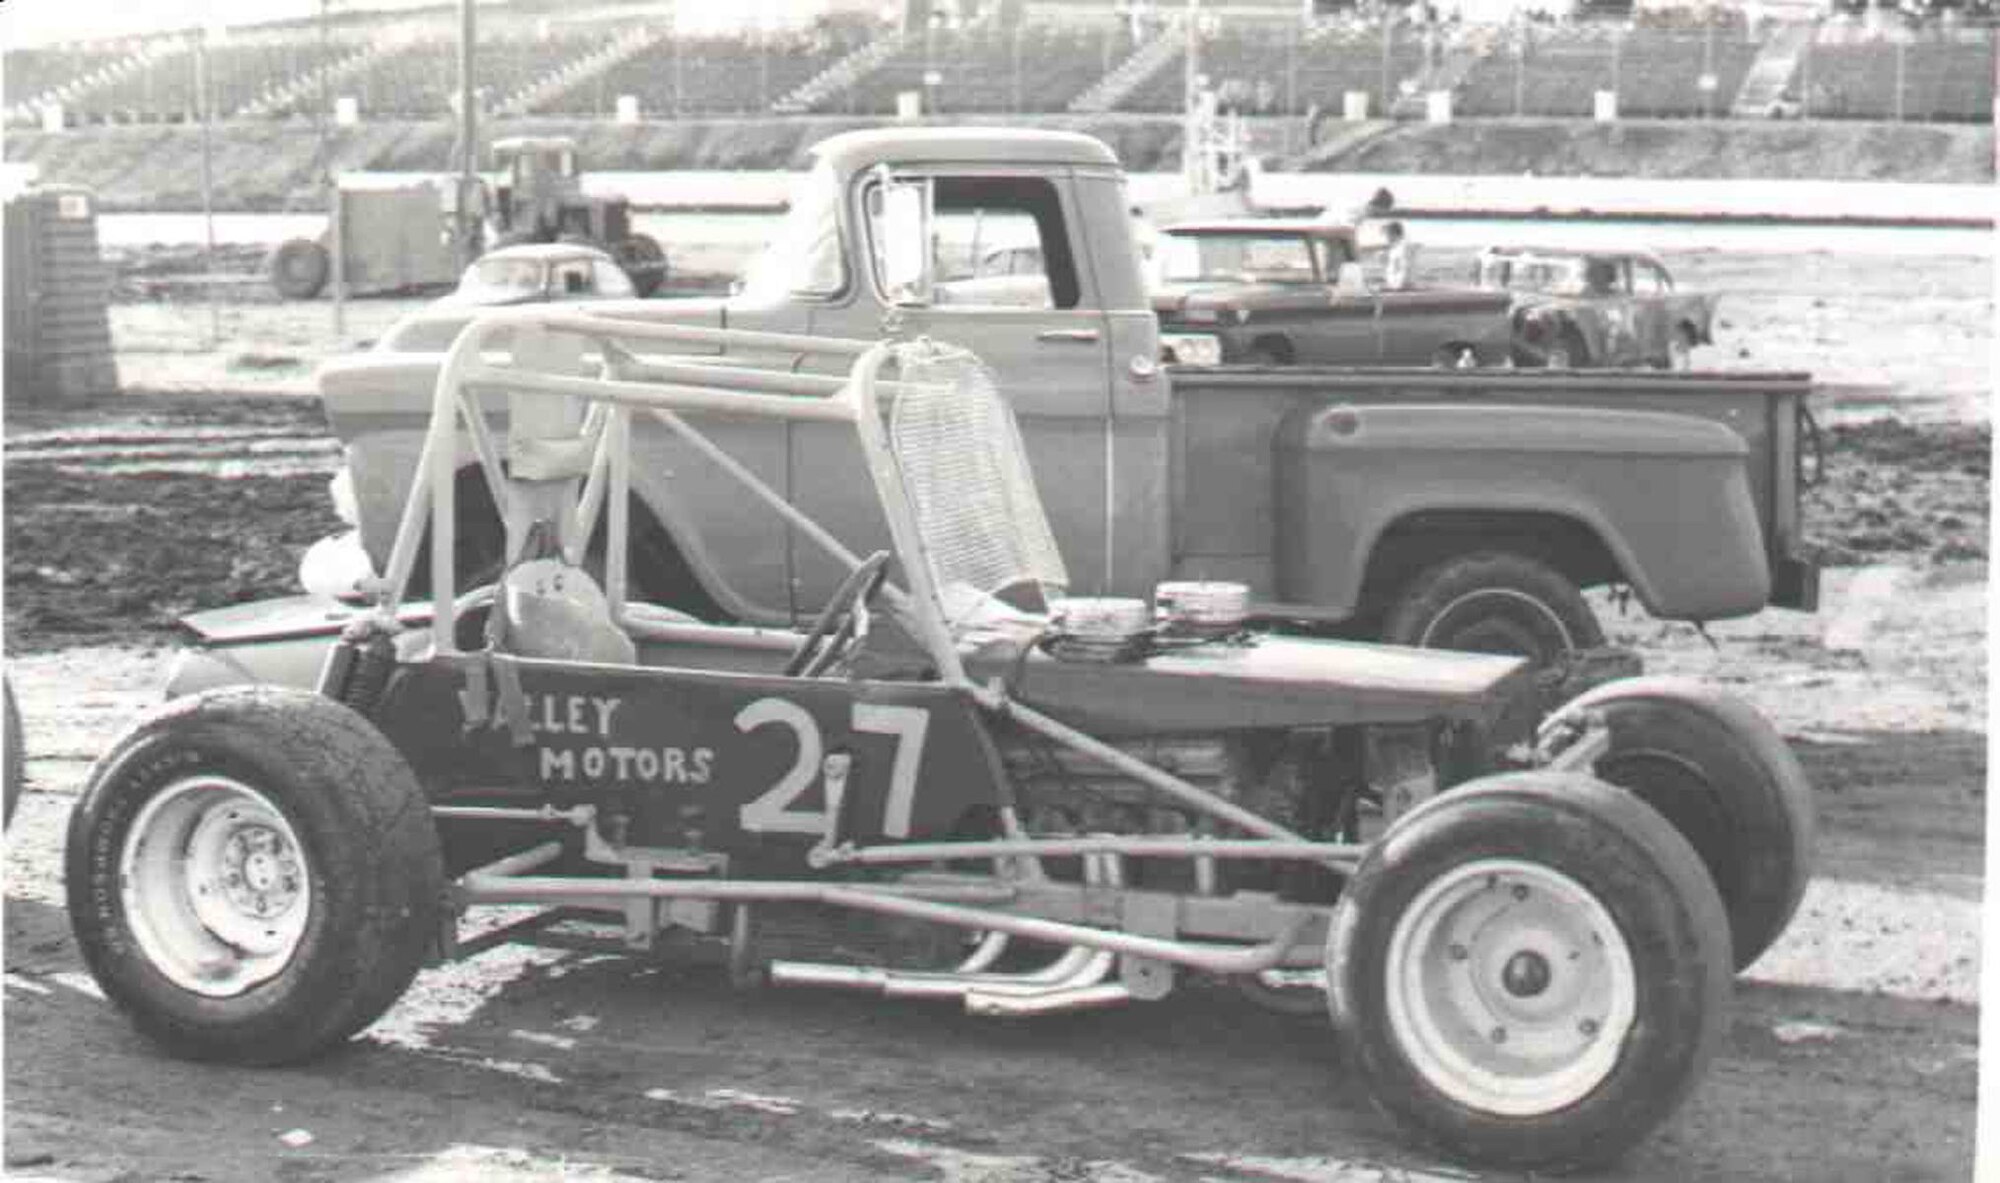 Here is an example of an early modified race car (circa 1960). This photo courtesy ElectricCity Speedway, driver unknown. Modern modified race cars are powered by alcohol burning V-8 engines and create 500 to 600 horsepower. (Courtesy photo).